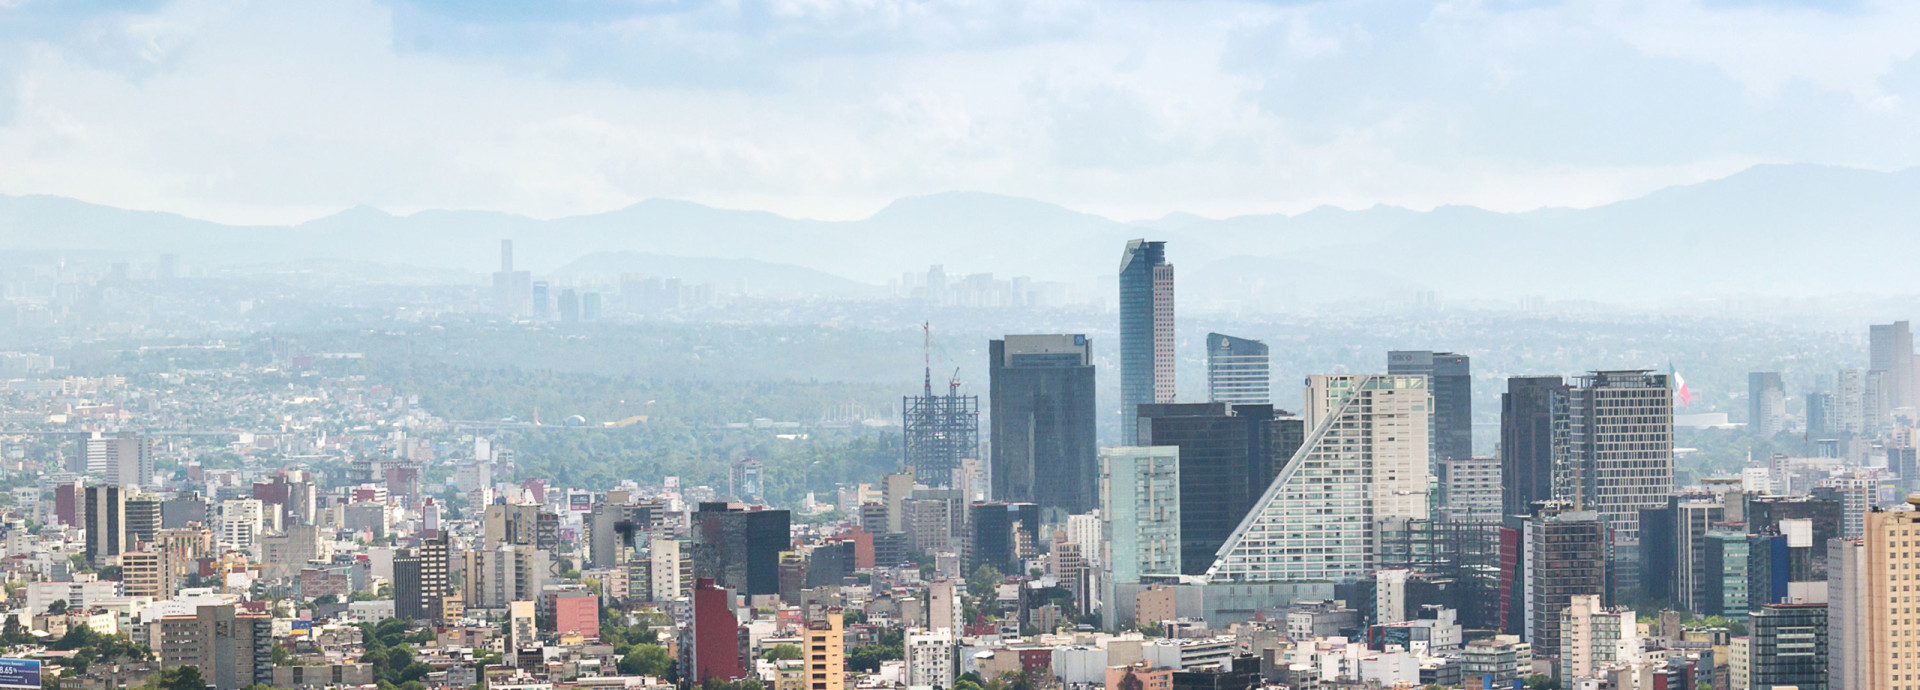 View on Mexico City